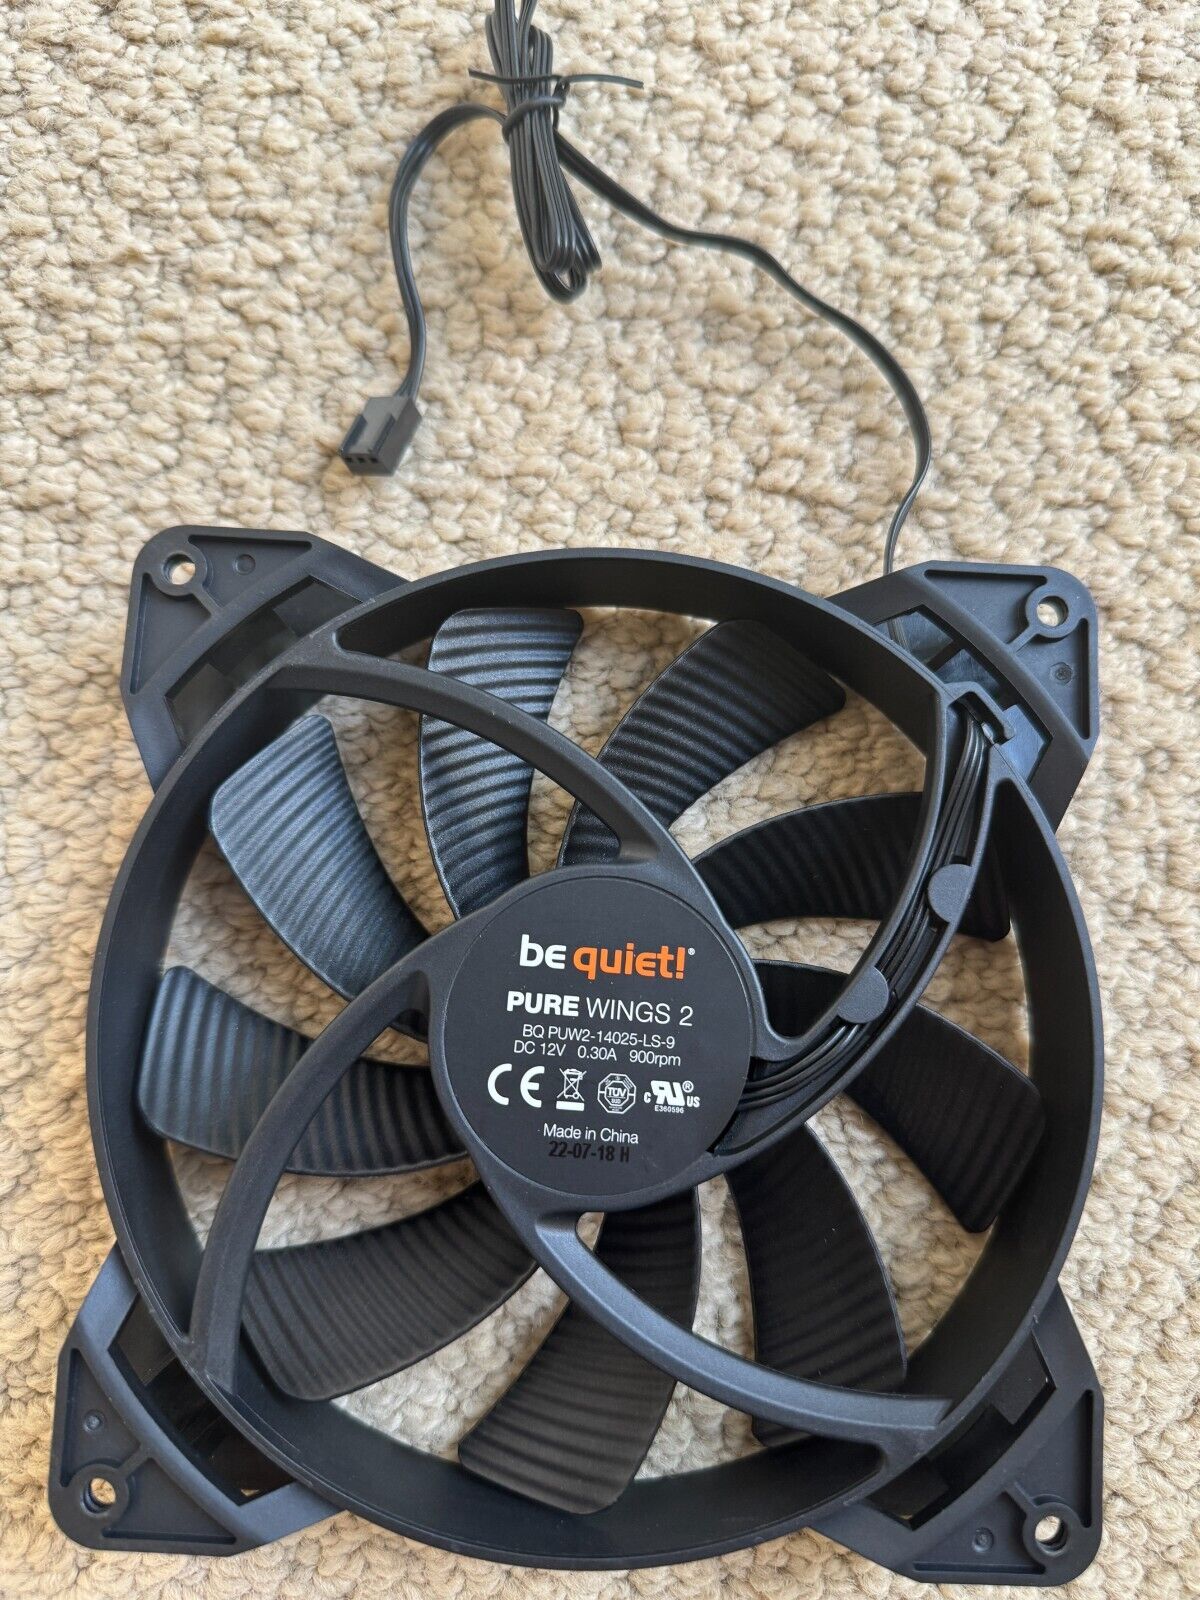 Lot of 12 Be Quiet Pure Wings 2 140mm case fans New Open Box